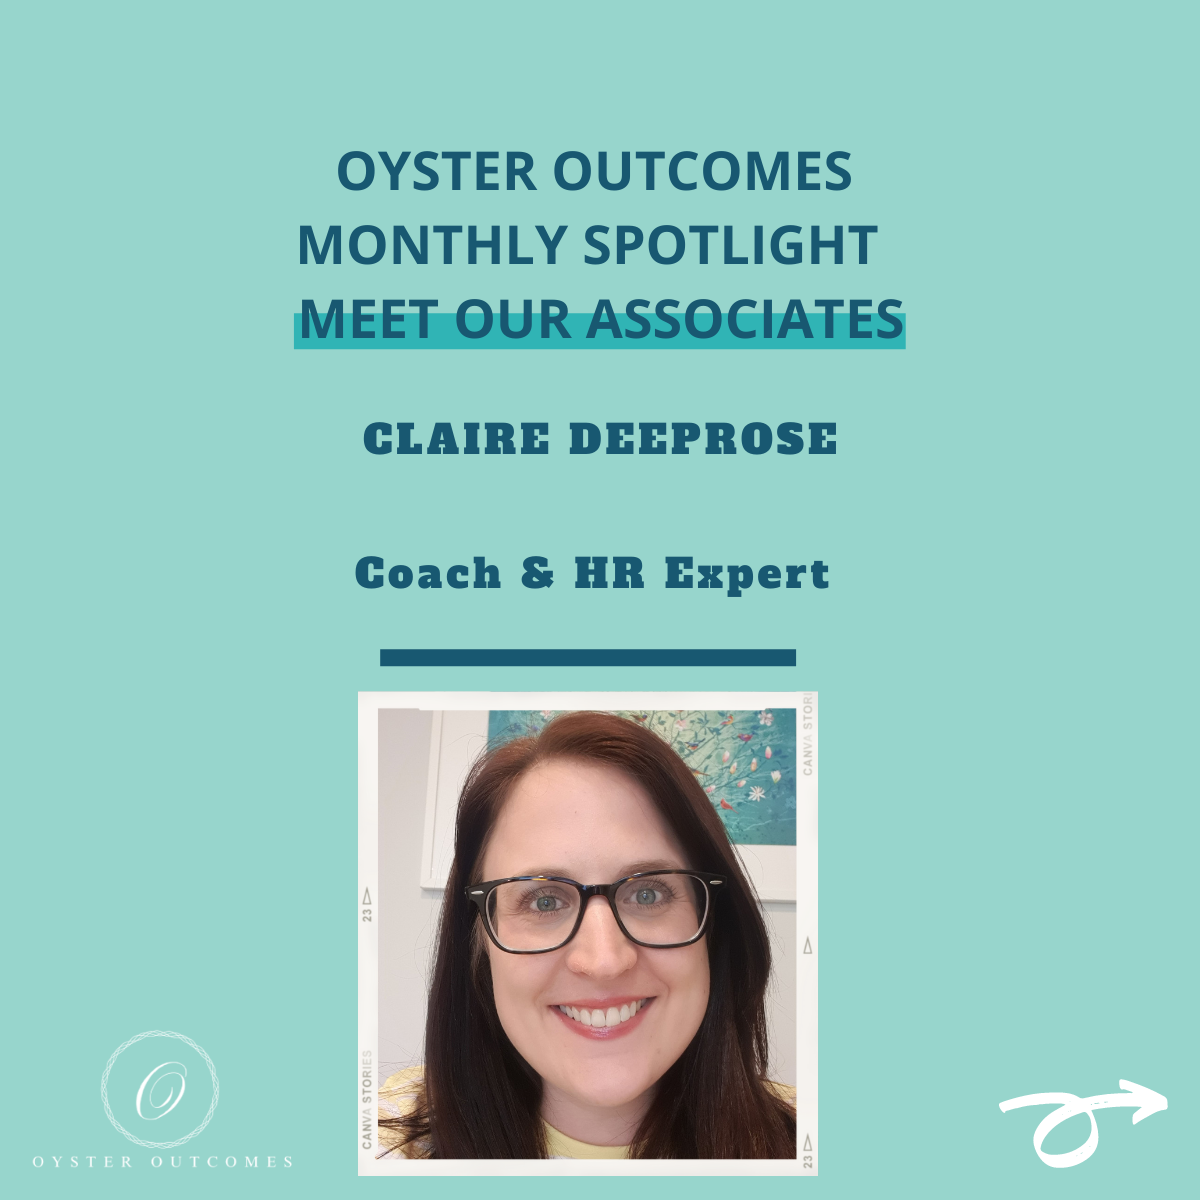 Introducing Claire Deeprose